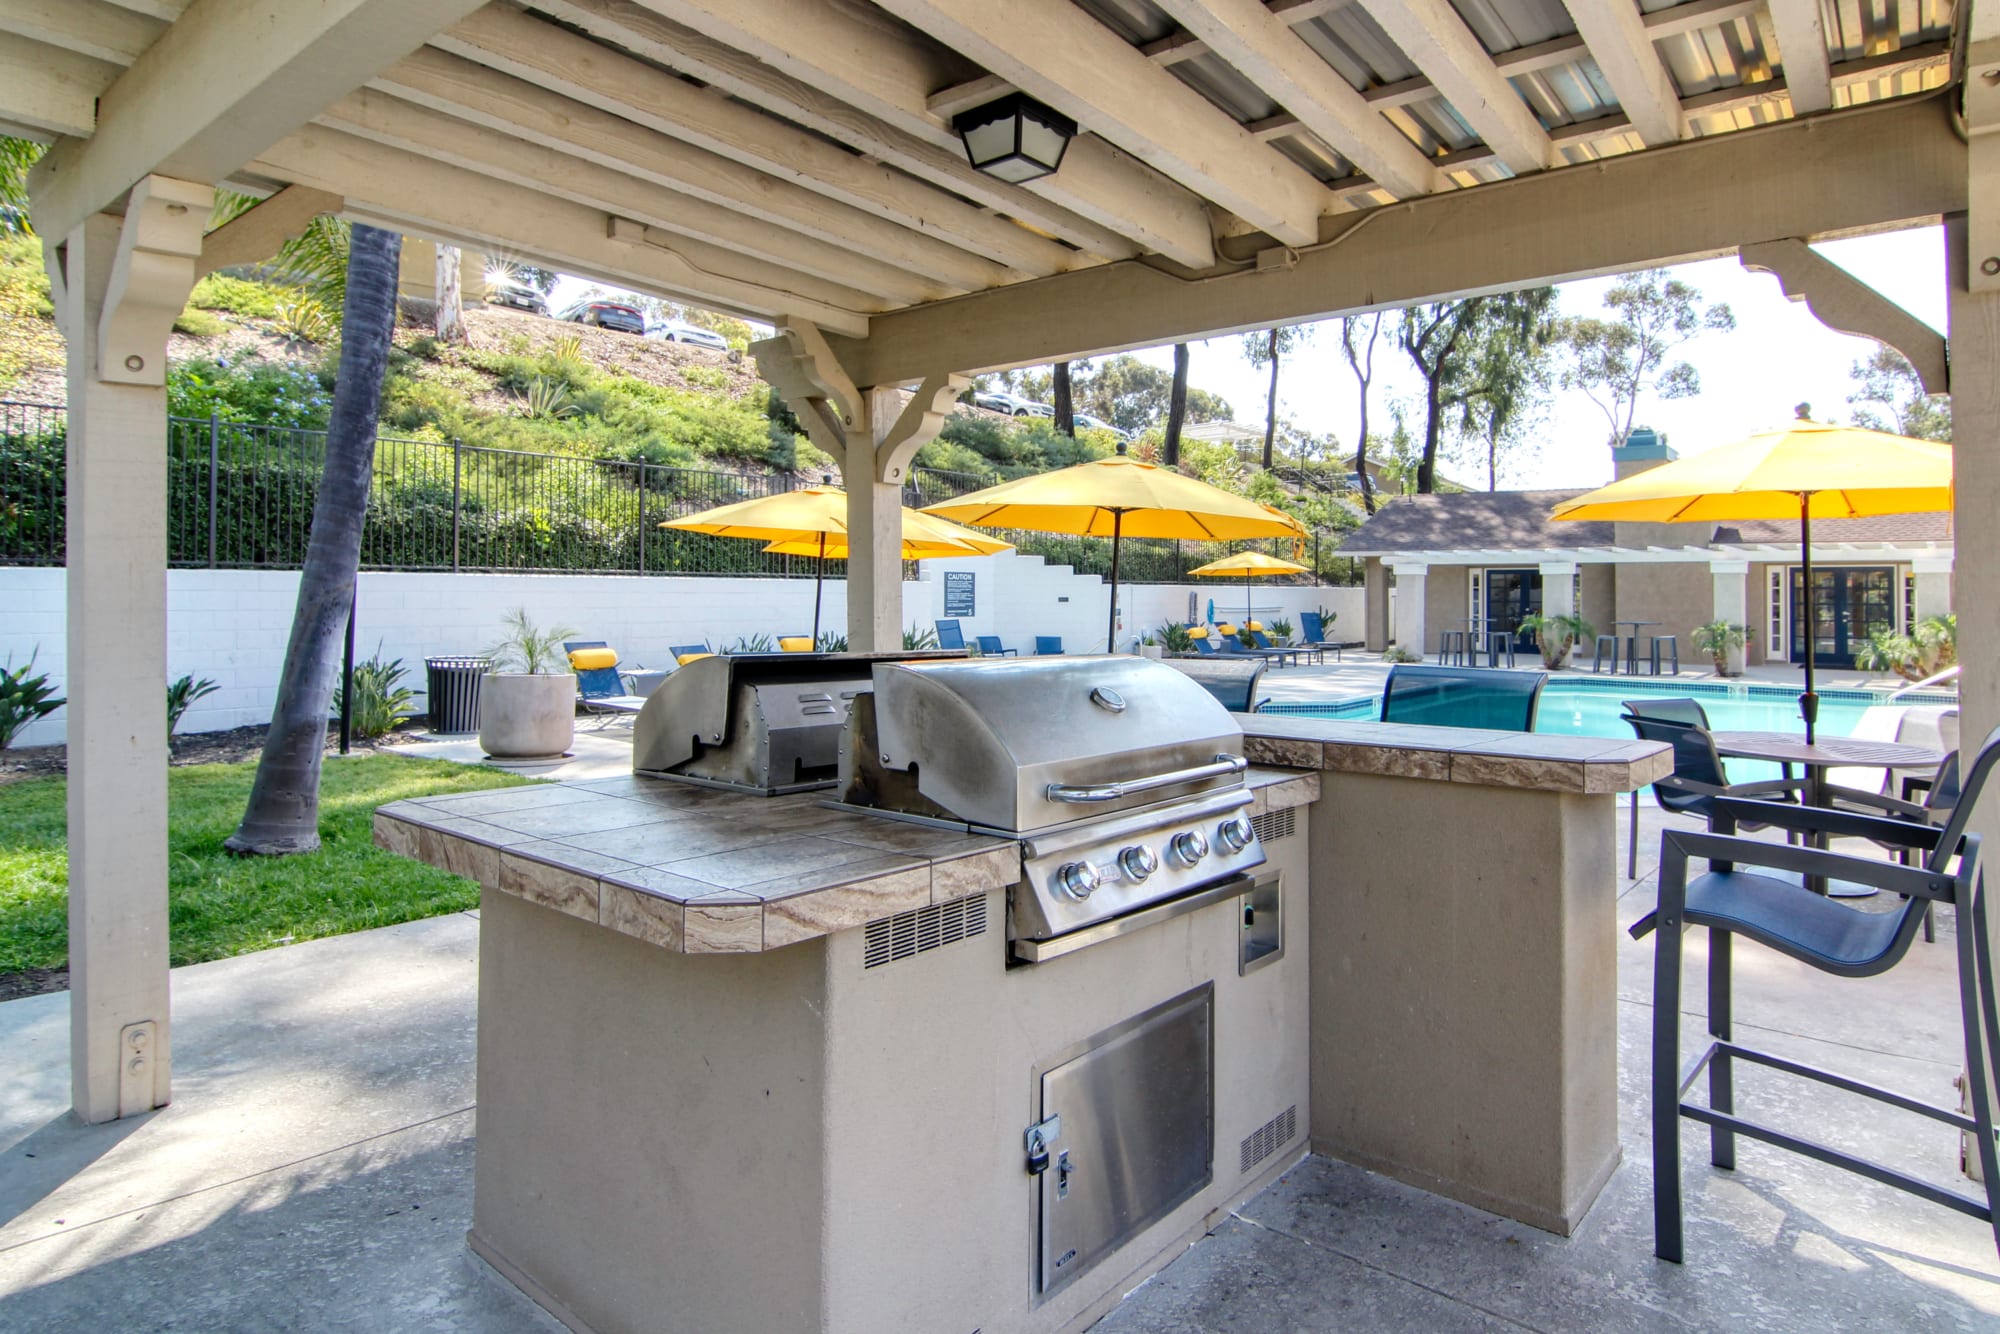 Covered poolside barbecue area at Lakeview Village Apartments in Spring Valley, California